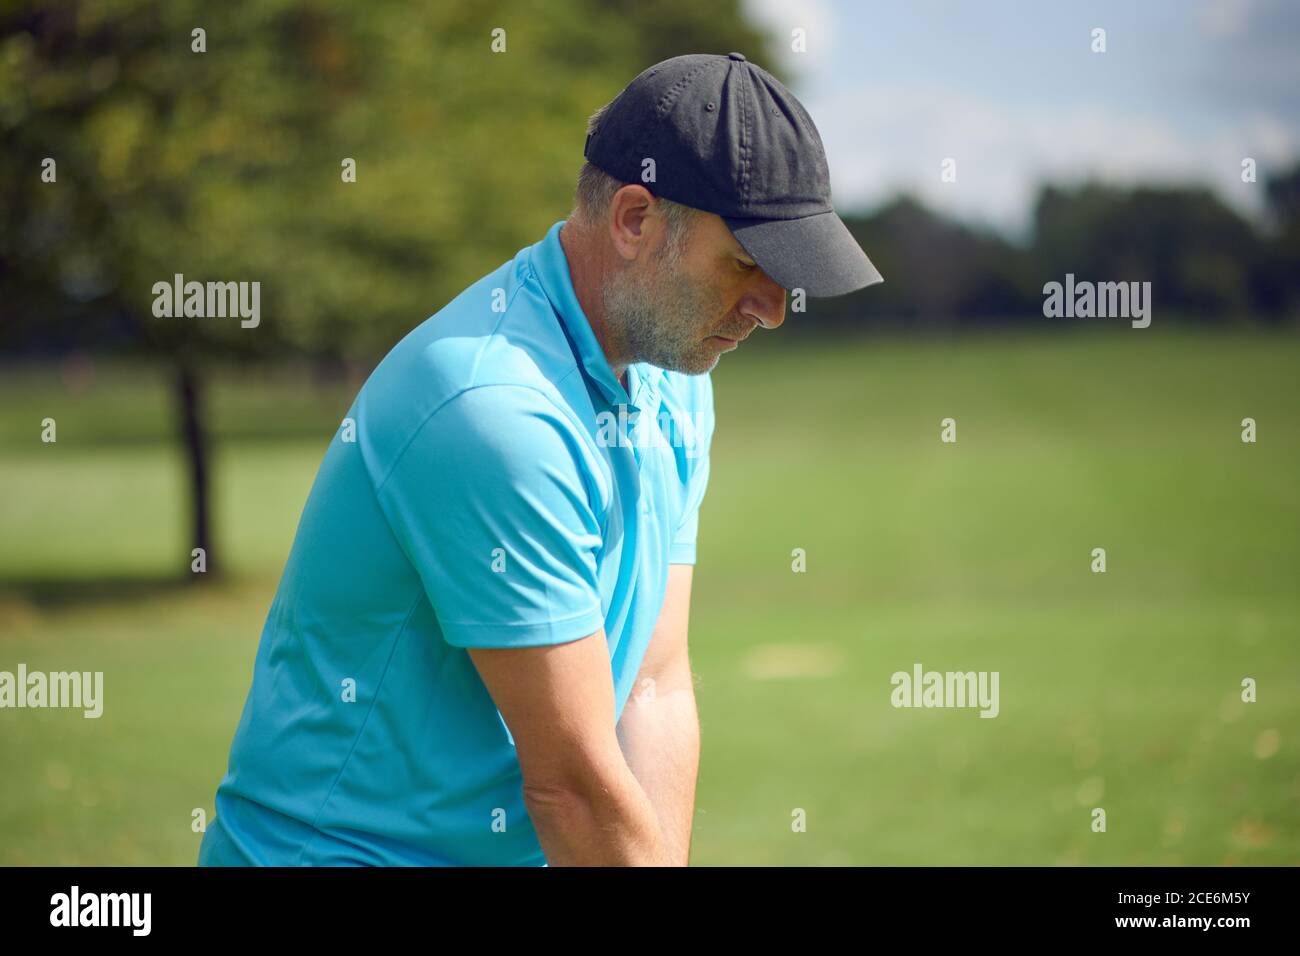 Male golfer swinging at the ball with an iron club as he takes his shot on a golf course in a closeup upper body view in a healthy active lifestyle co Stock Photo